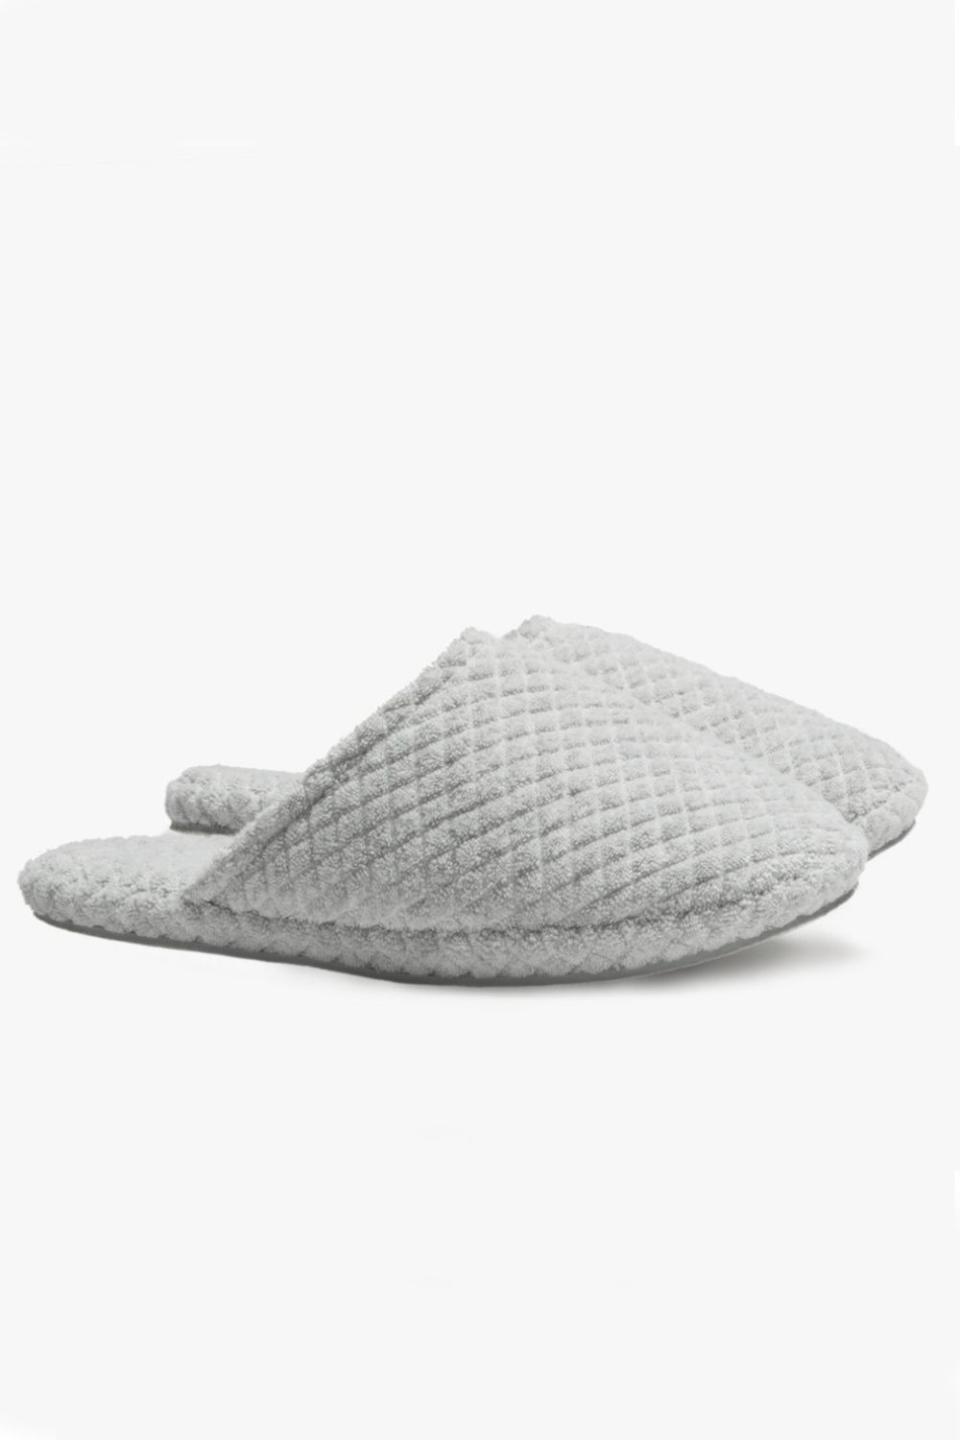 11) Quilted Slippers